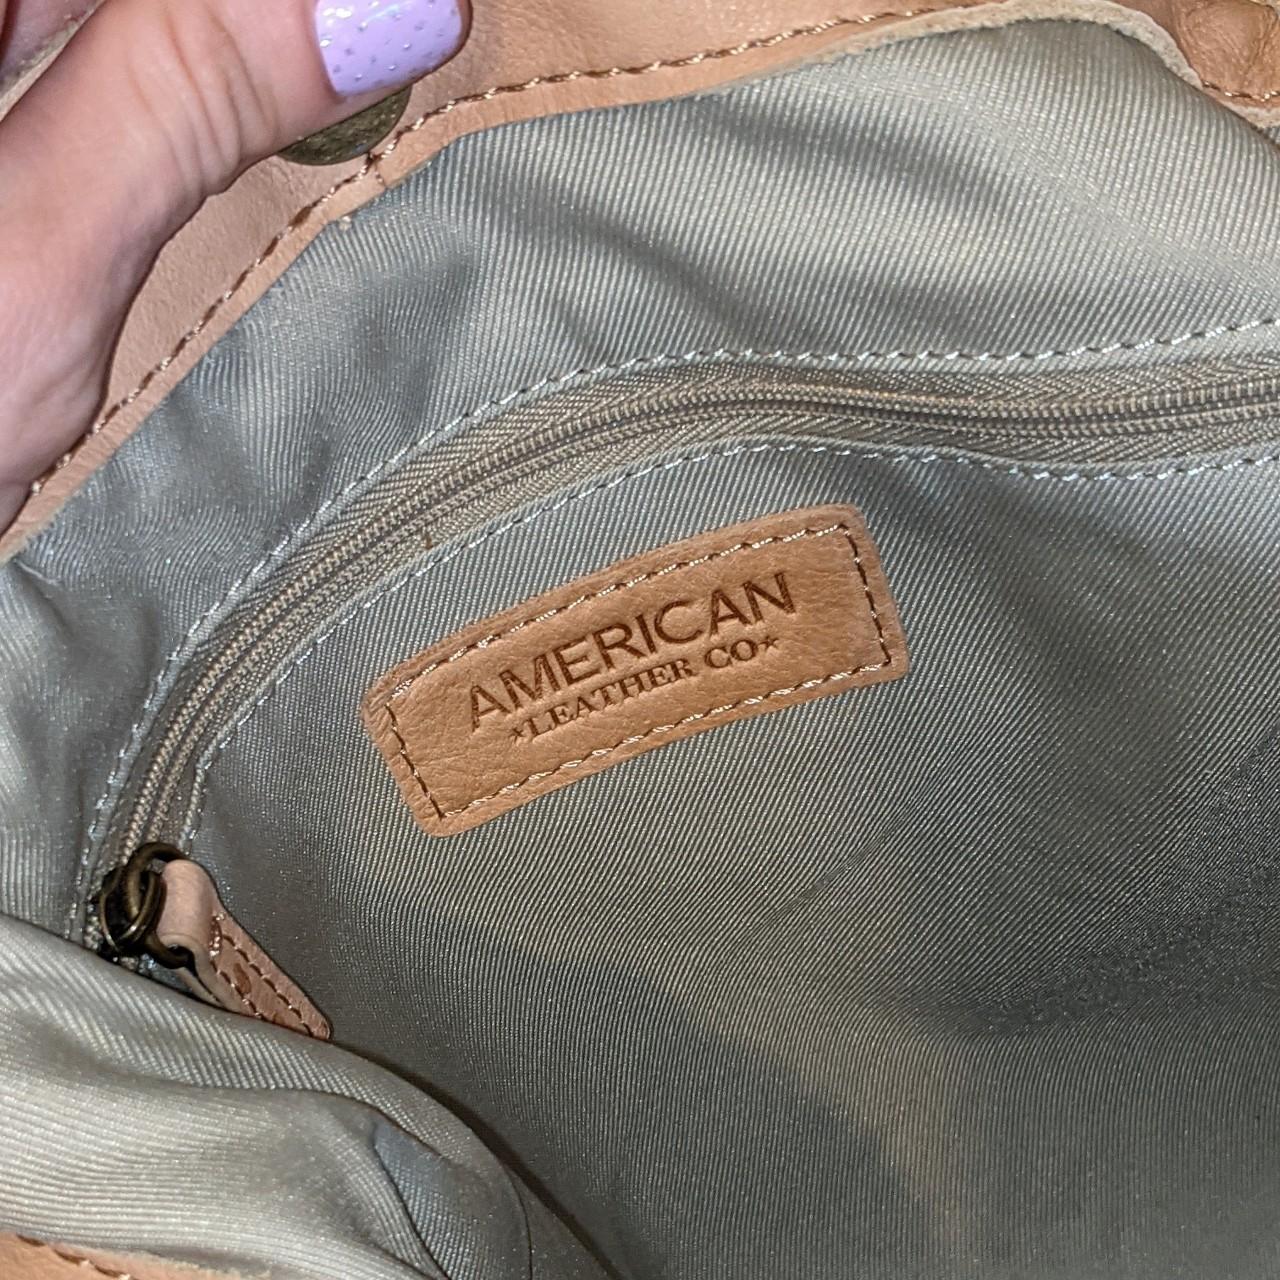 AMERICAN LEATHER CO. Shoulder Bags & Purses for Women | Nordstrom Rack